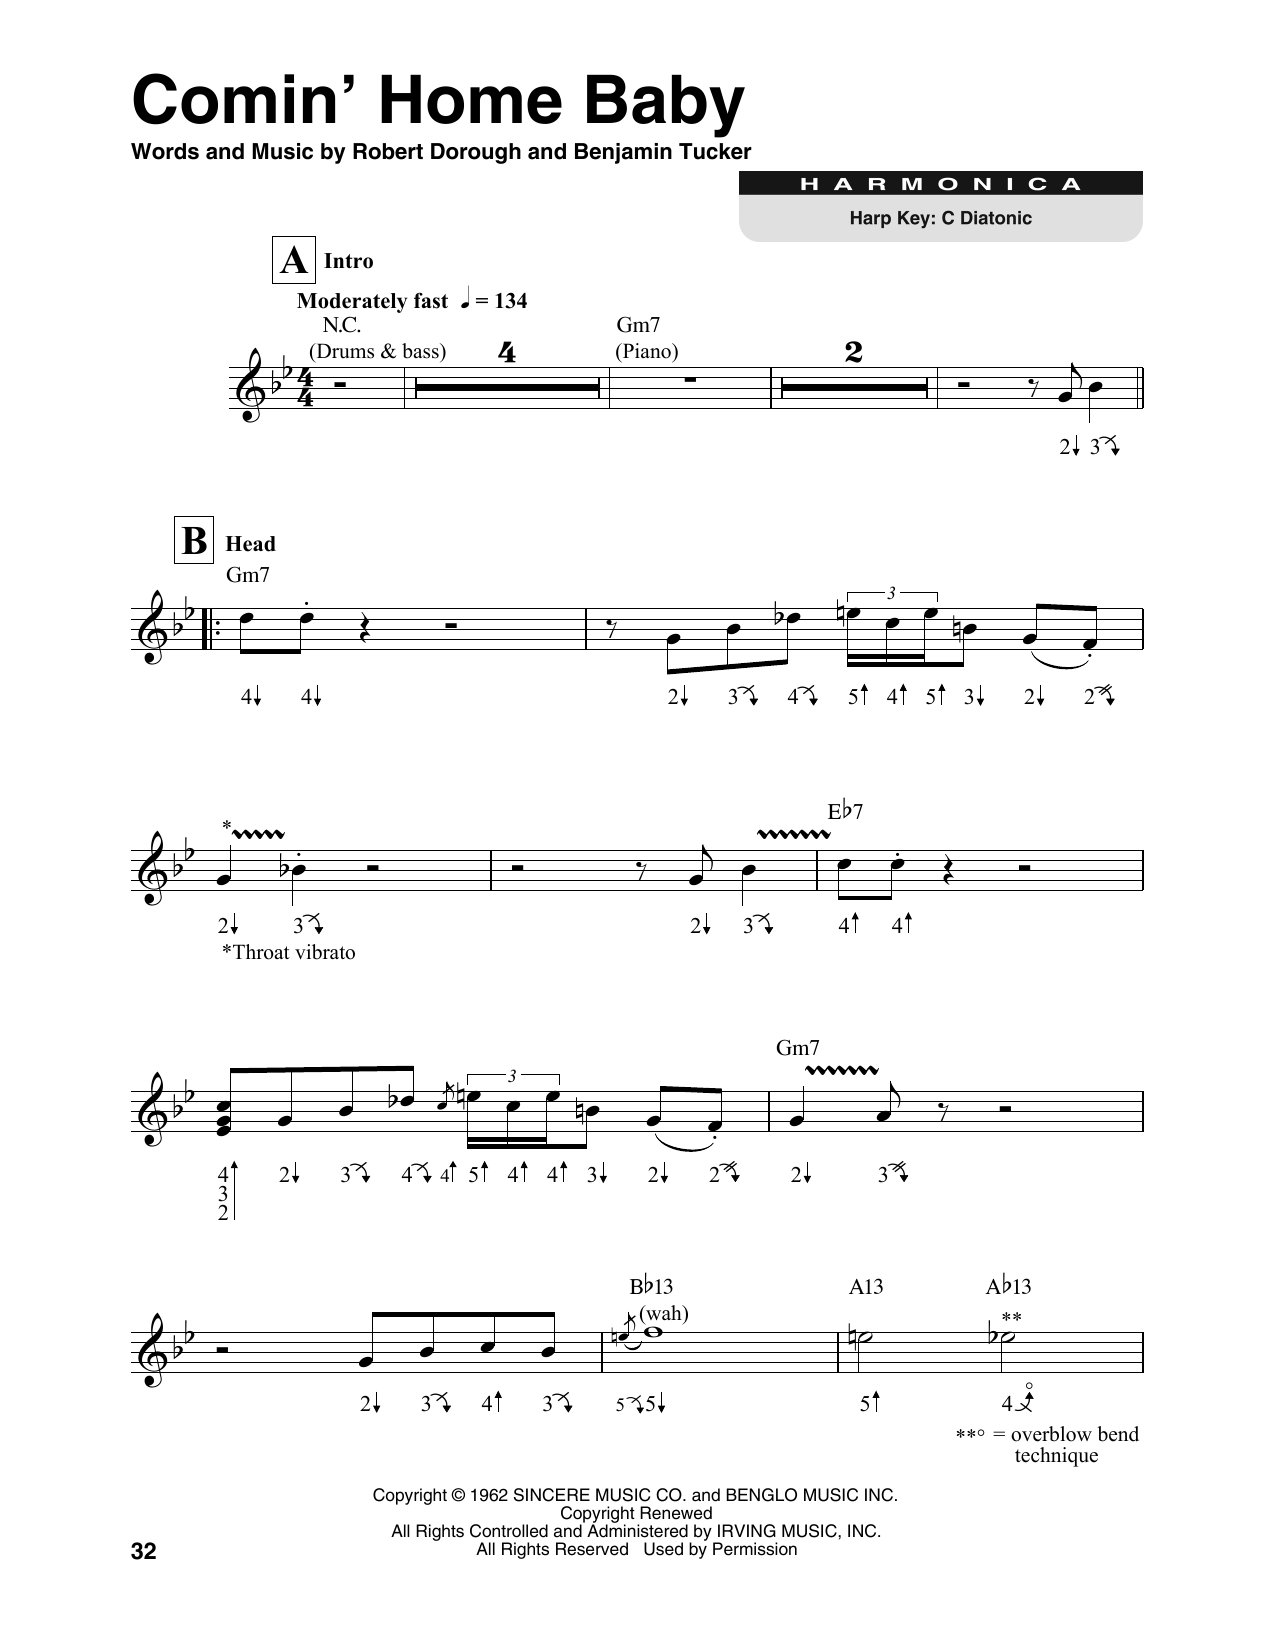 Michael Buble Comin' Home Baby sheet music notes printable PDF score